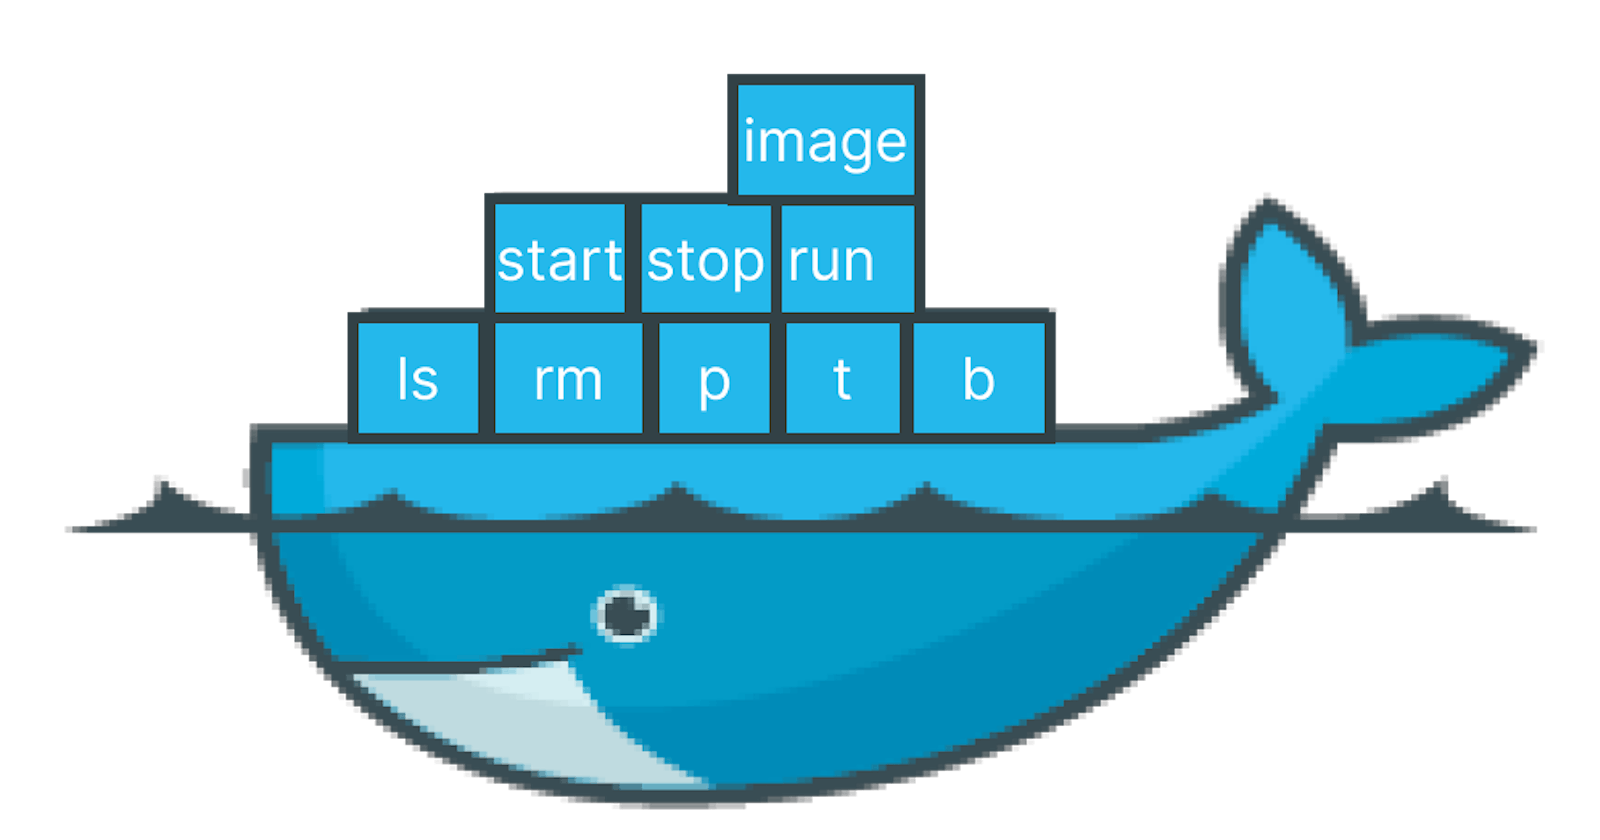 Essential Docker Commands for Container Management and Deployment